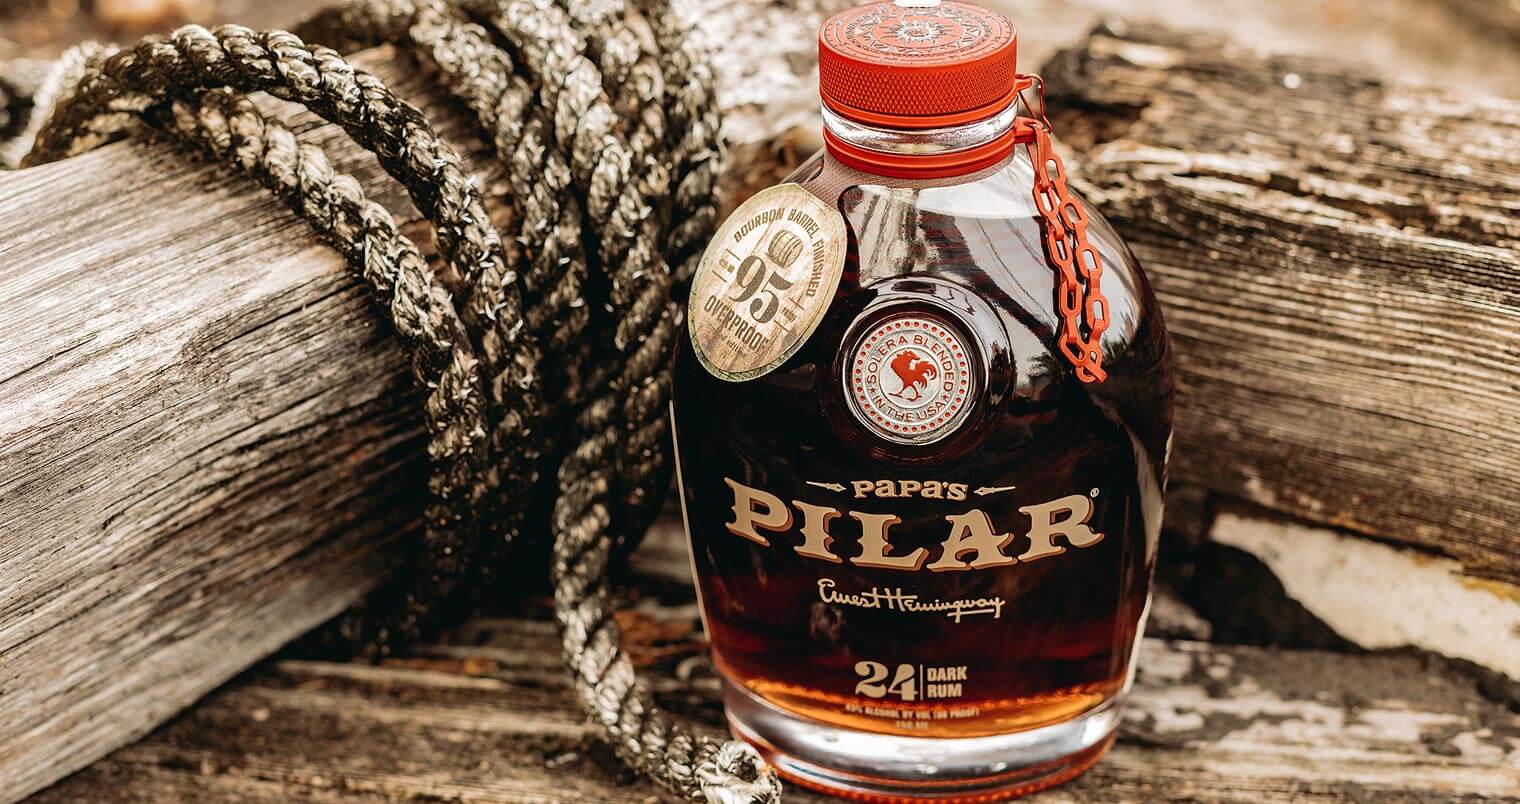 Papa's Pilar Limited Edition Bourbon Barrel Finished Dark Rum, featured image